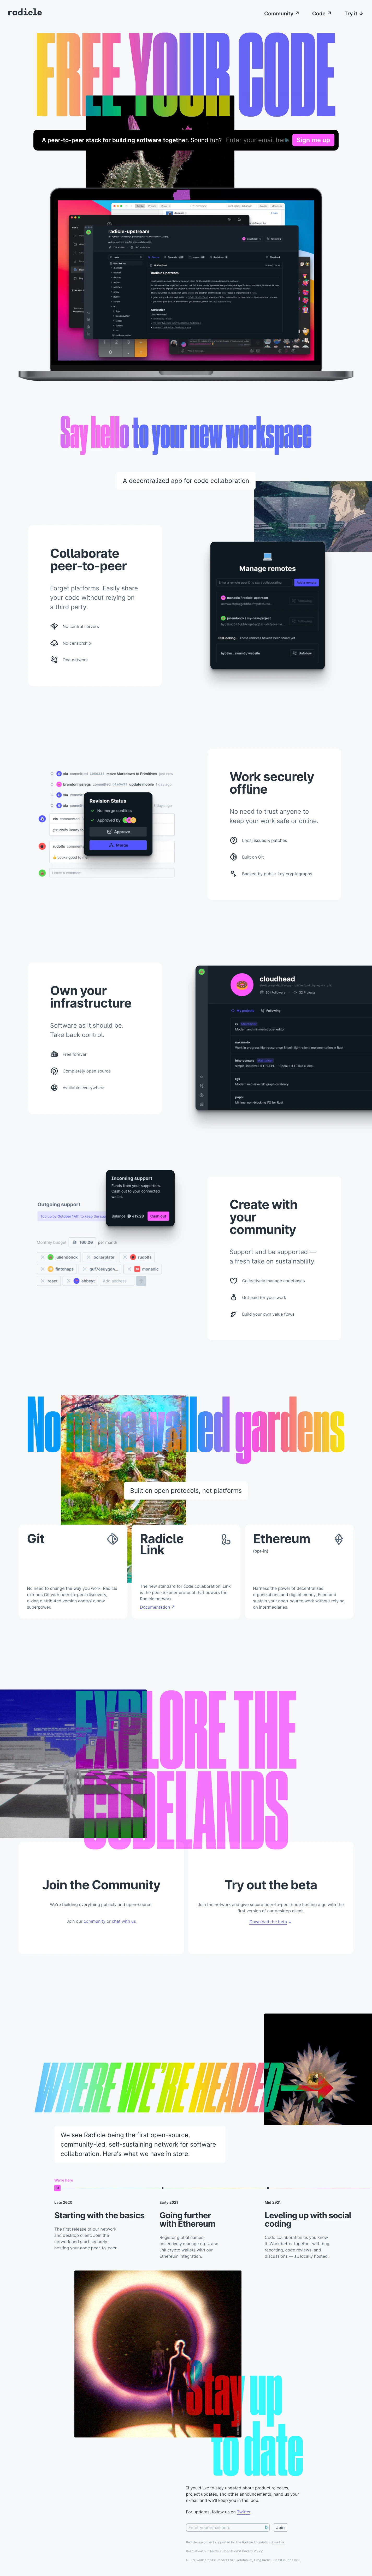 radicle Landing Page Example: Radicle is a peer-to-peer stack for building software together.